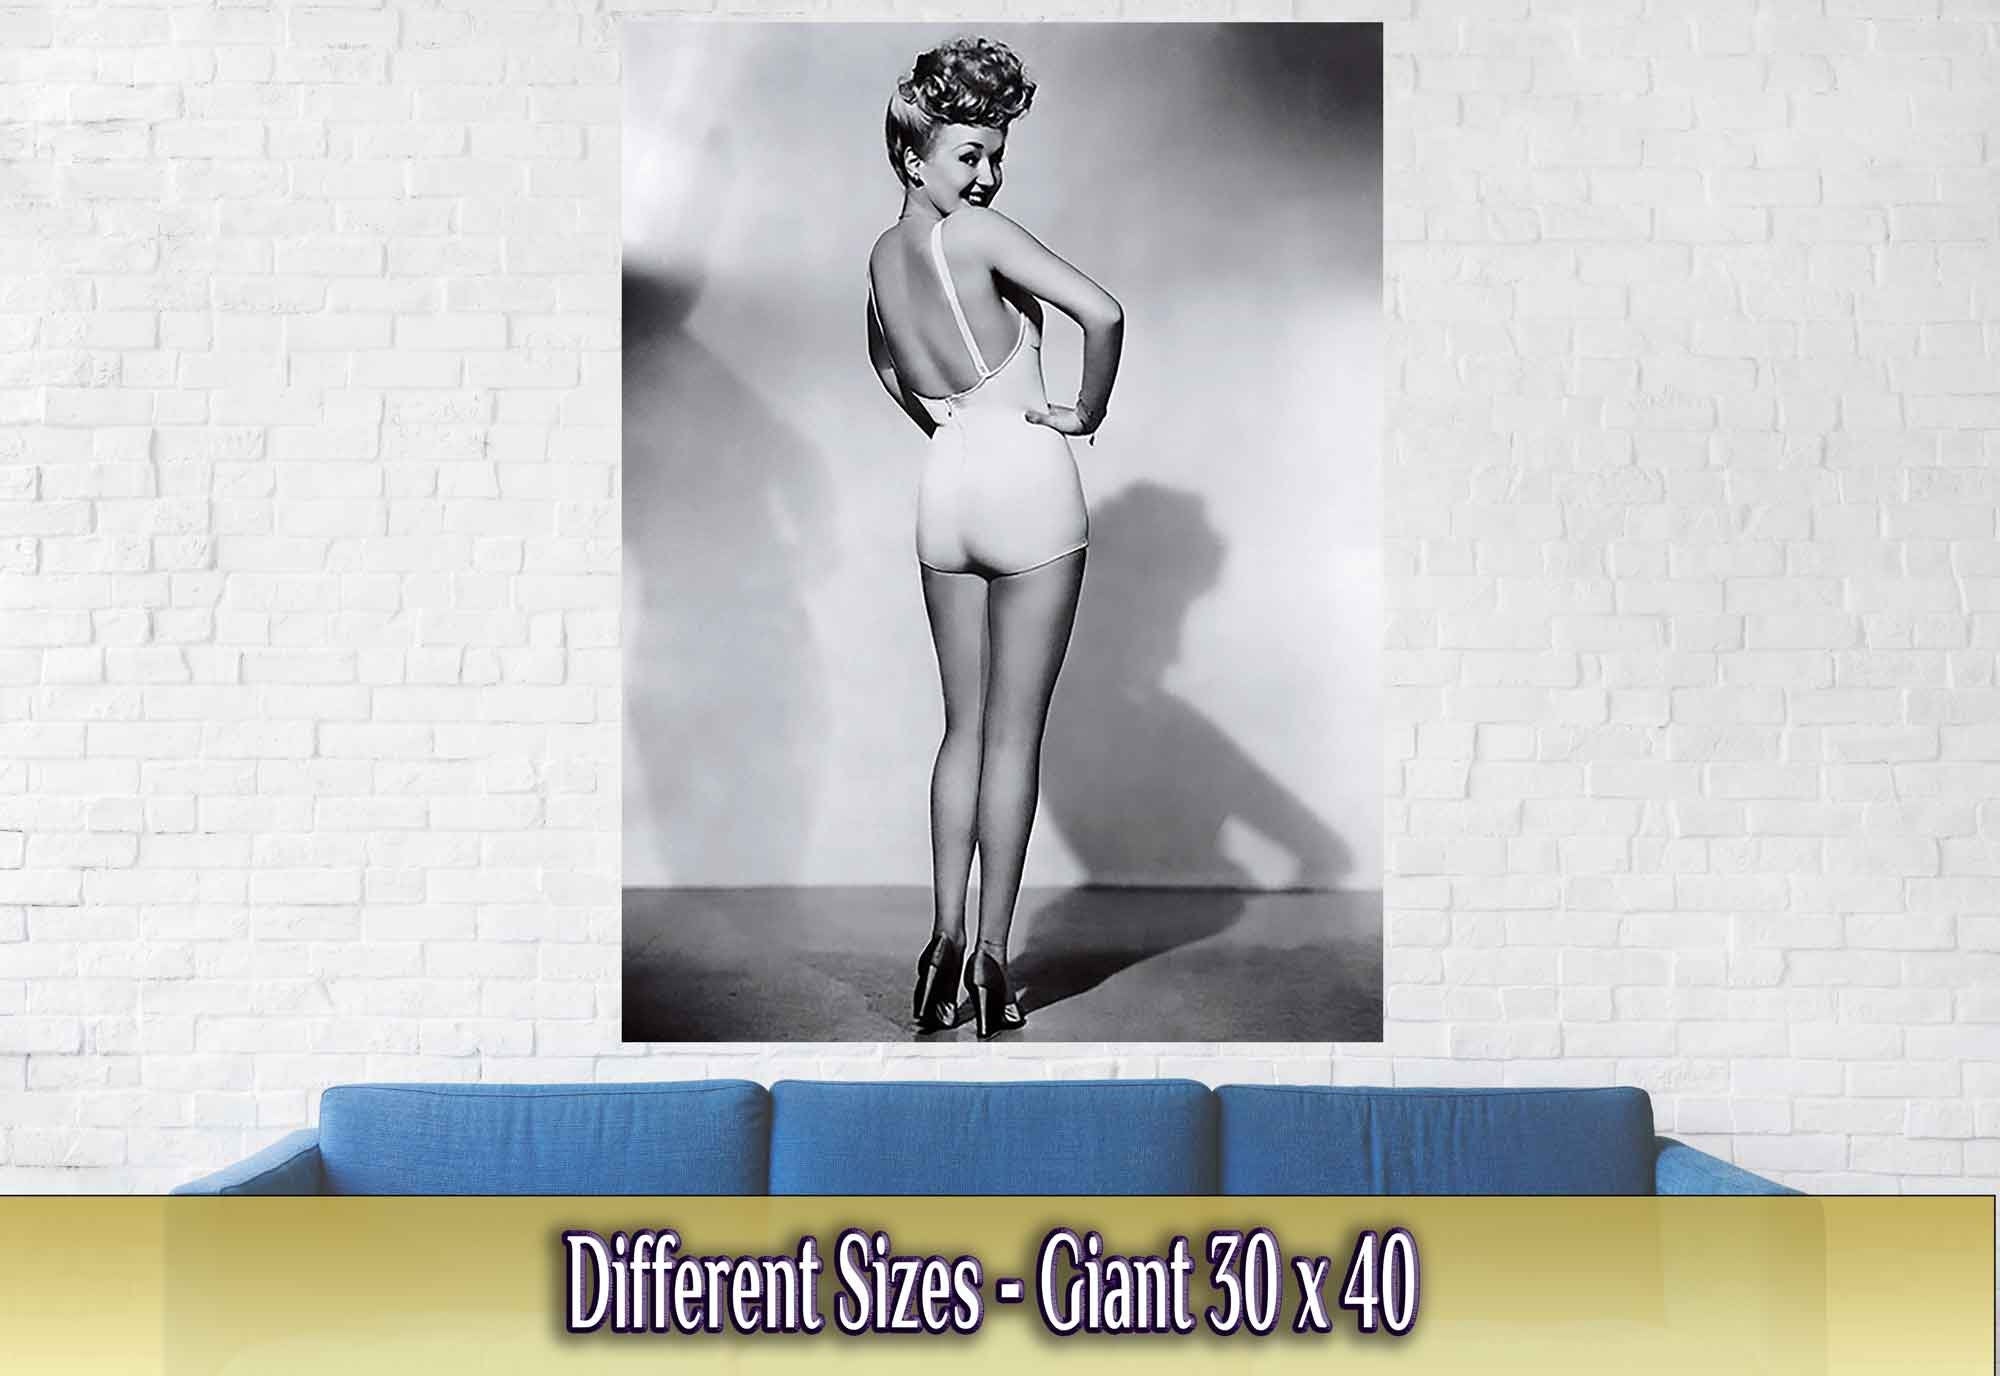 Betty Grable Swimsuit Poster, Famous Photo Print From 1943, First Pin Up Girl, Inspired American Soldiers In Ww2. - WallArtPrints4U